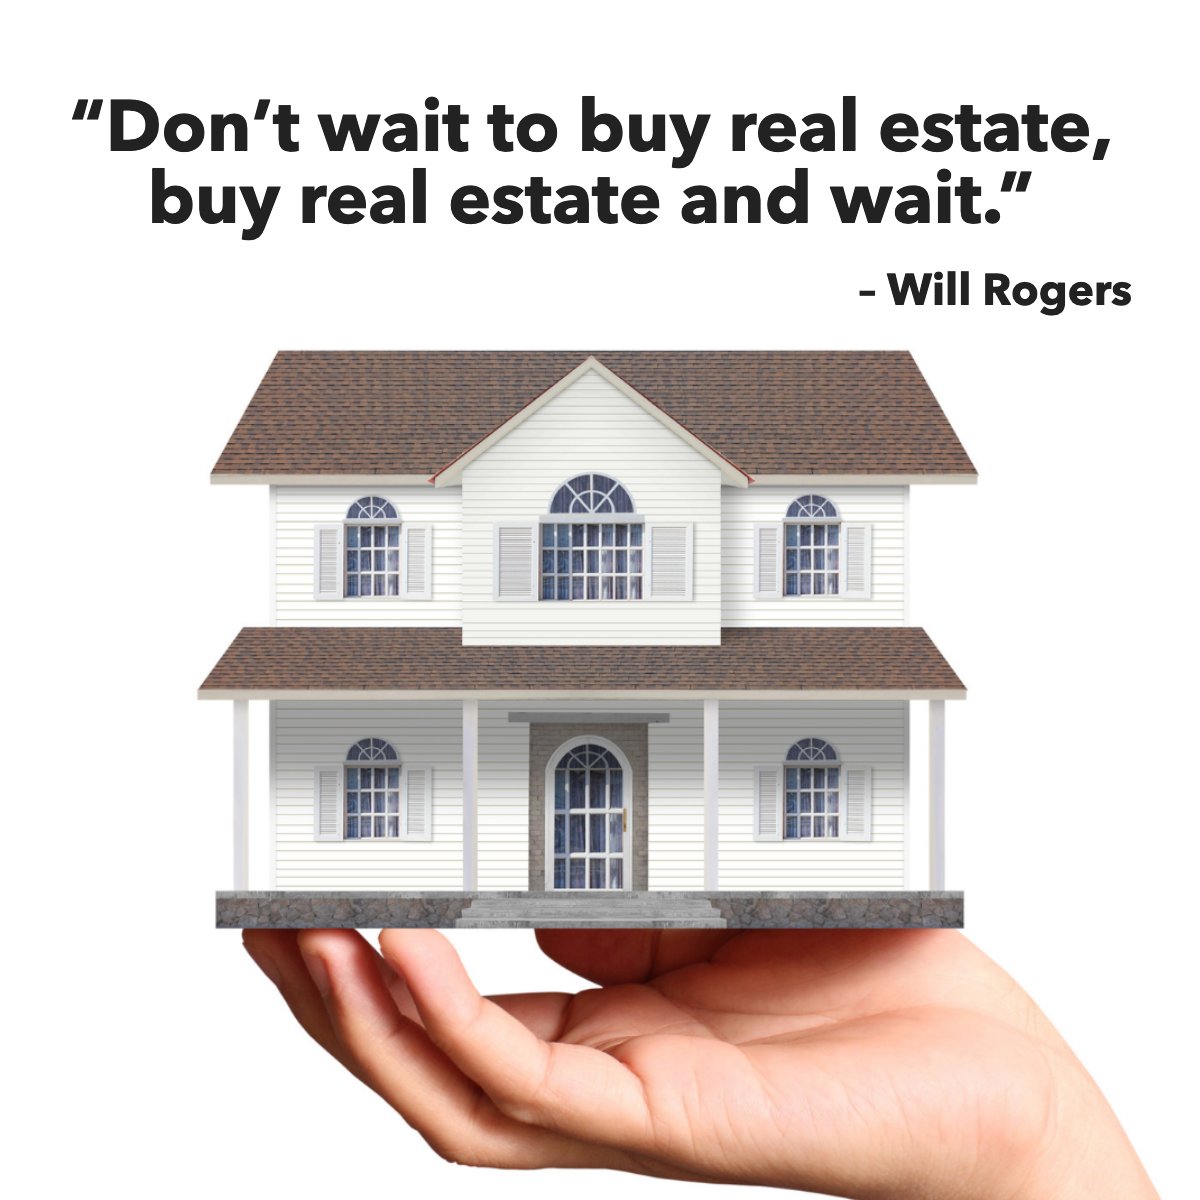 'Don't wait to buy real estate, buy real estate and wait.' 
― Will Rogers 📖

#realestate #house #buying #investing #invest #propertyinvestment #quote #quoteoftheday #WillRogers